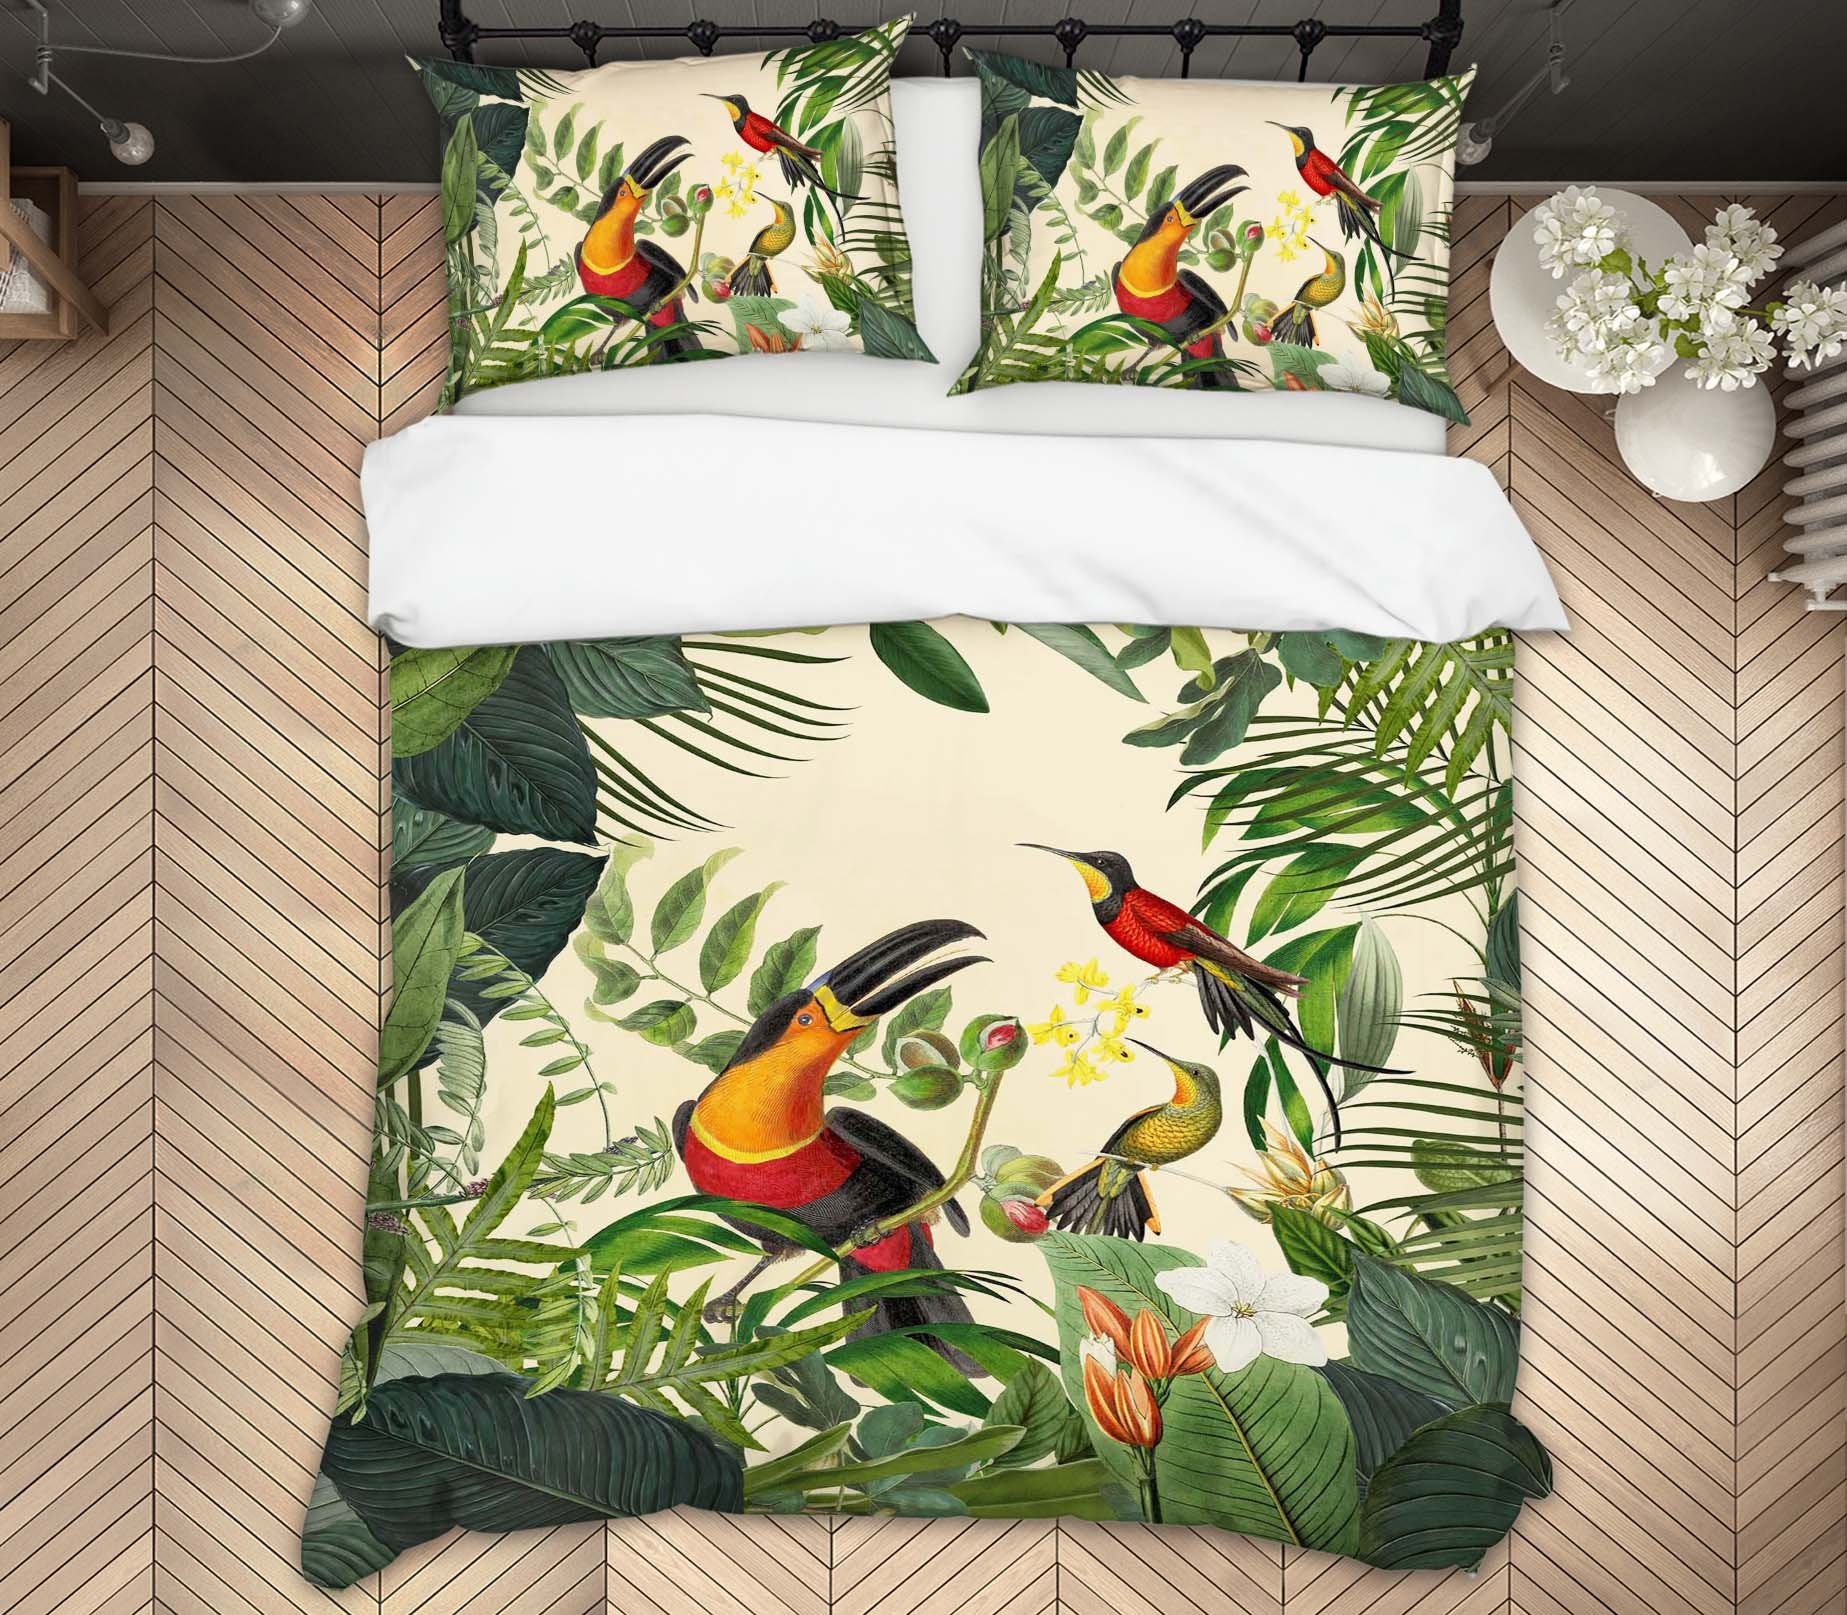 3D Bird Forest 2106 Andrea haase Bedding Bed Pillowcases Quilt Quiet Covers AJ Creativity Home 